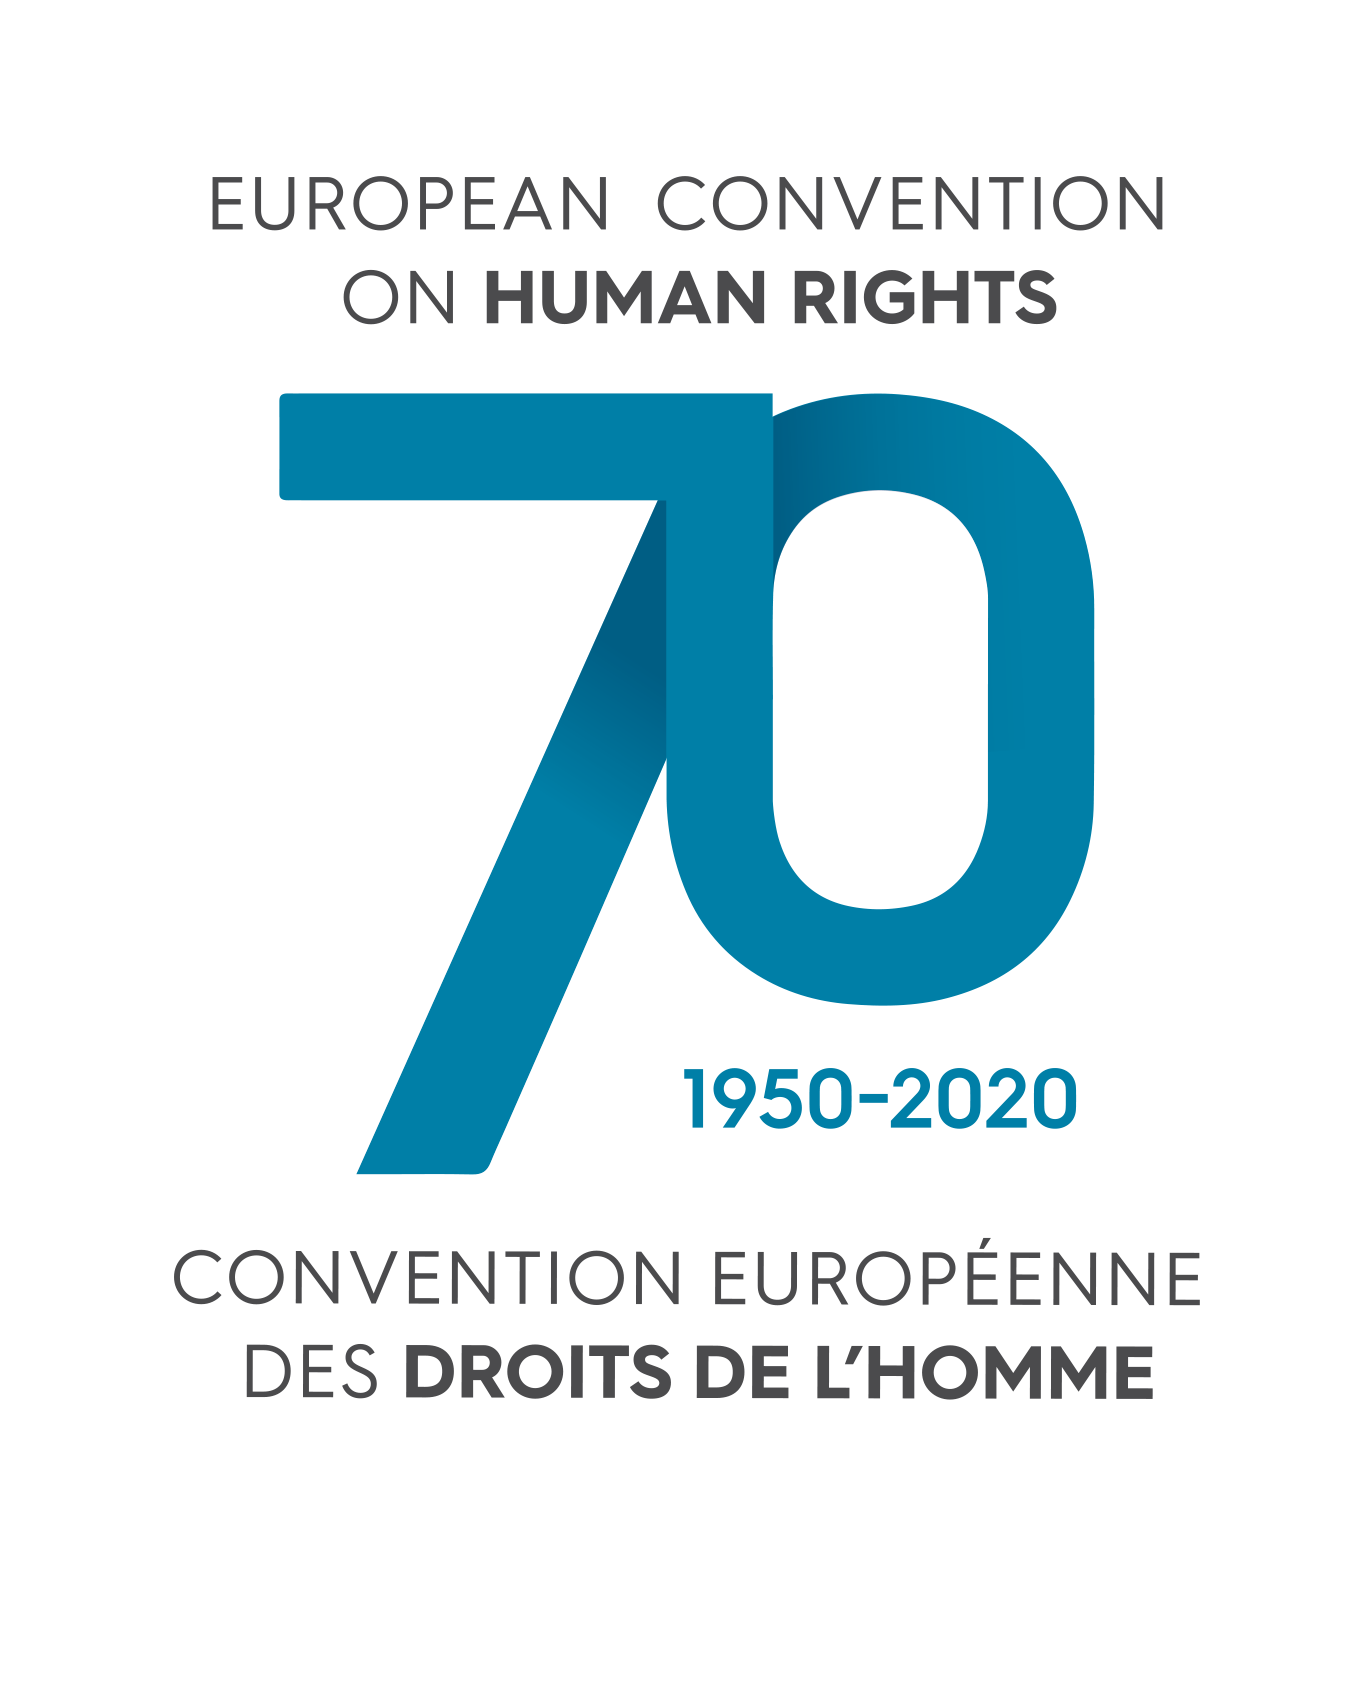 Marking 70 years of the European Convention on Human Rights in critical times